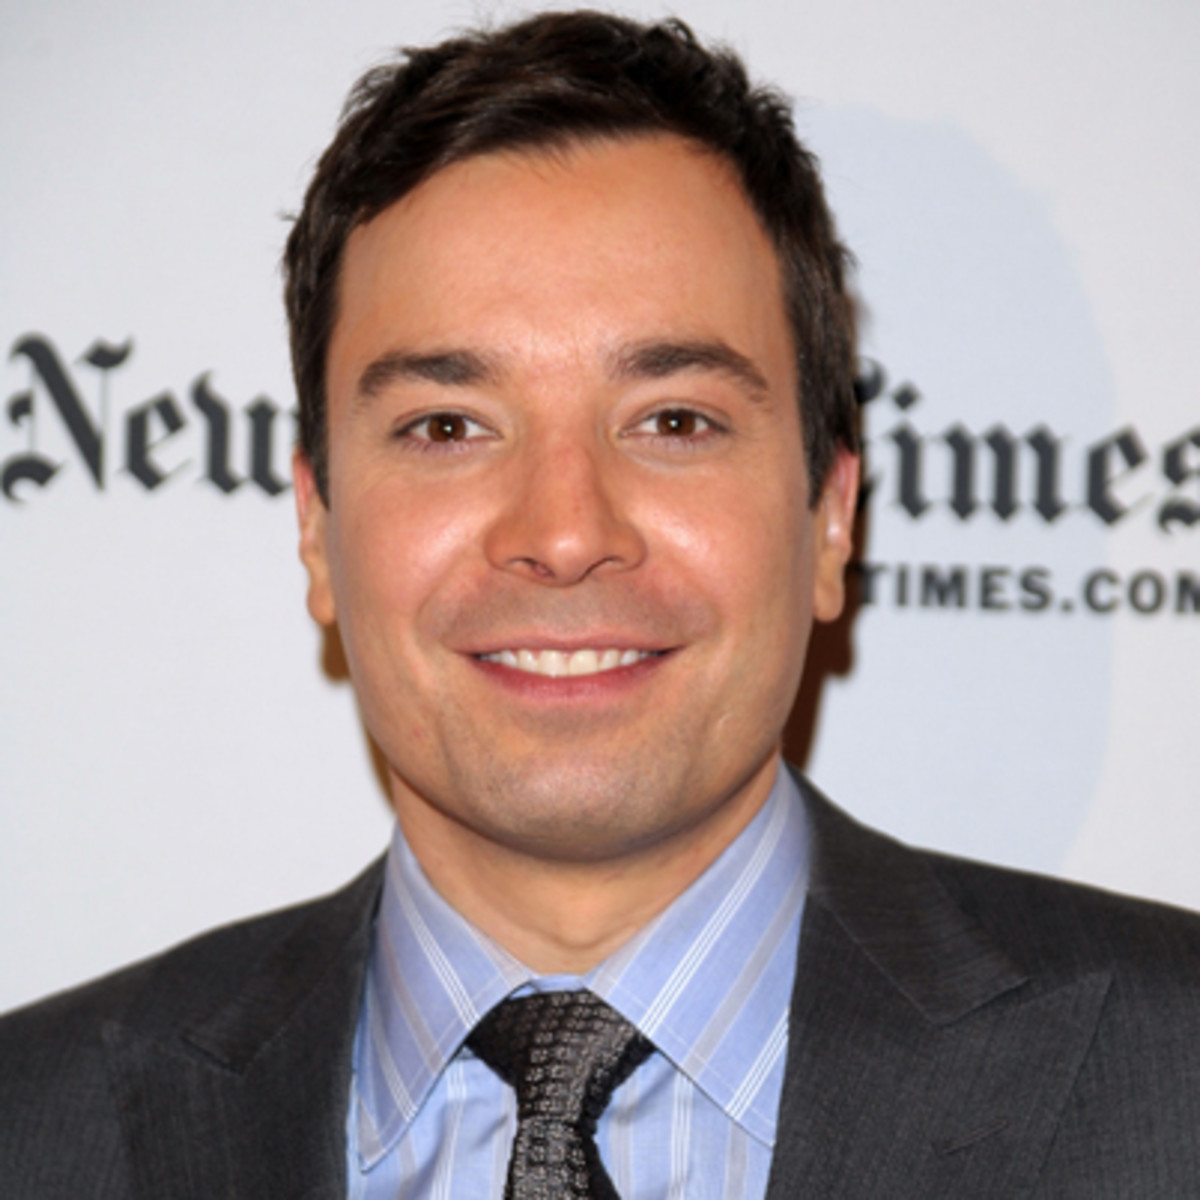 Jimmy Fallon Apologizes To 'The Tonight Show' Staff After Bombshell Report  – Deadline